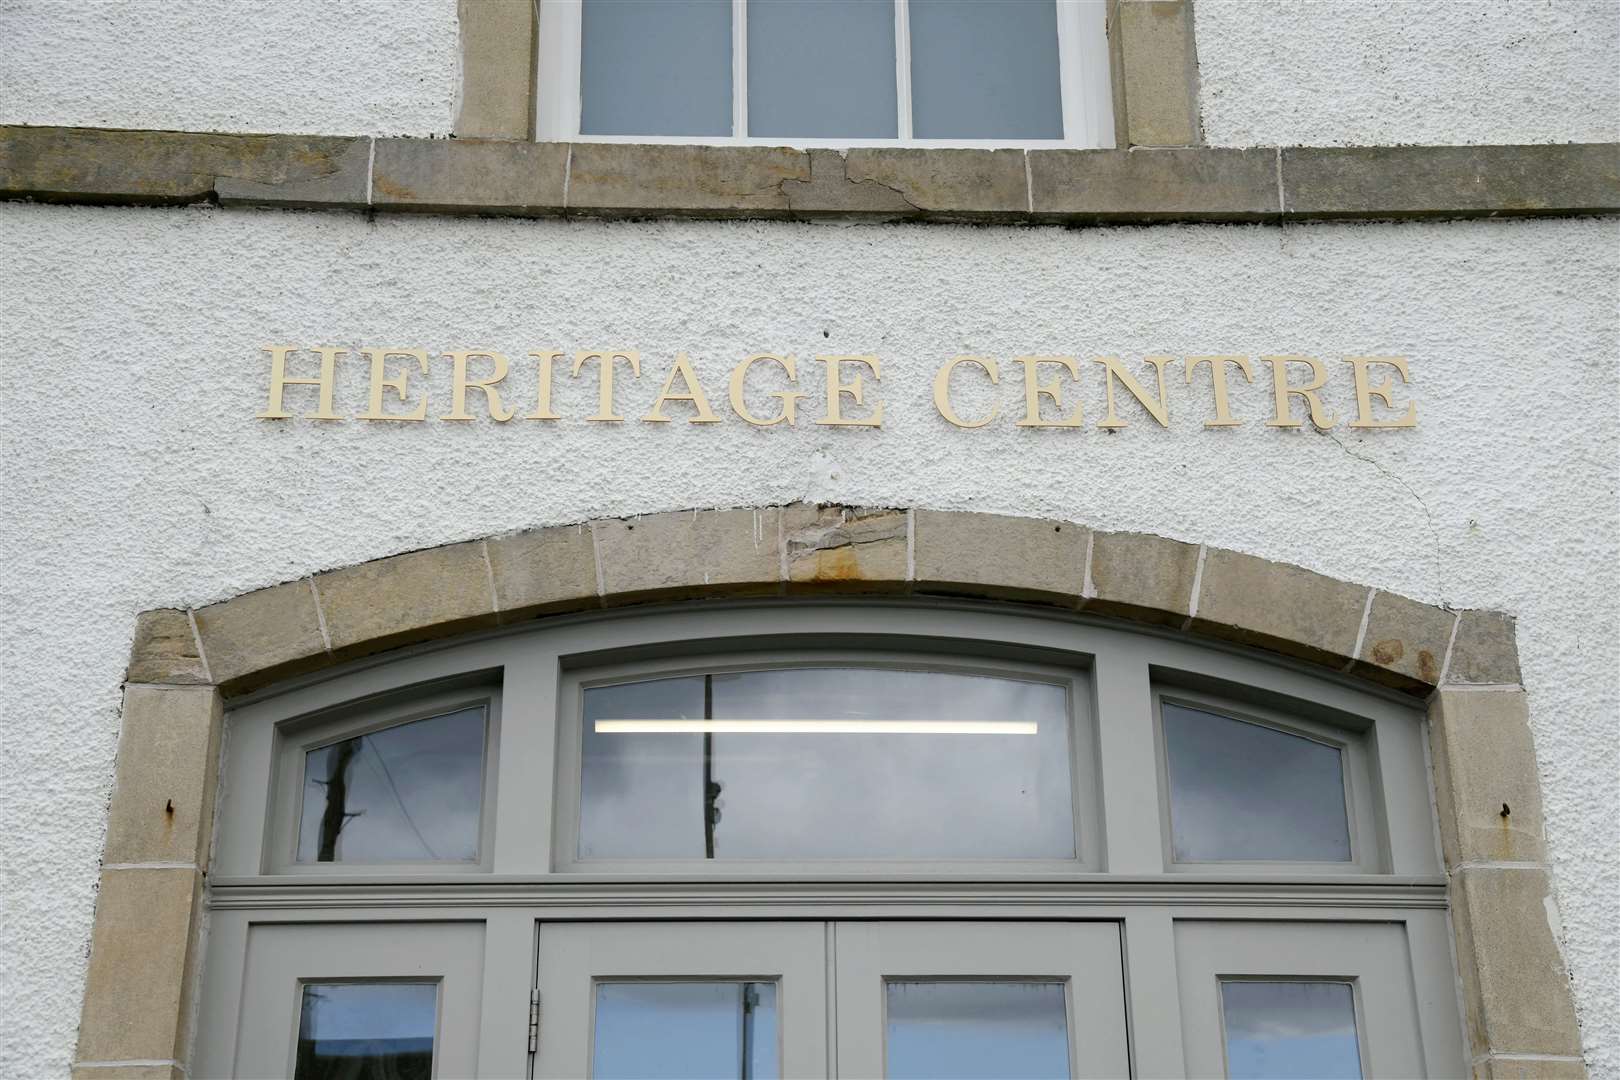 Creating the heritage centre has transformed the former Memorial Hall. Picture: Beth Taylor